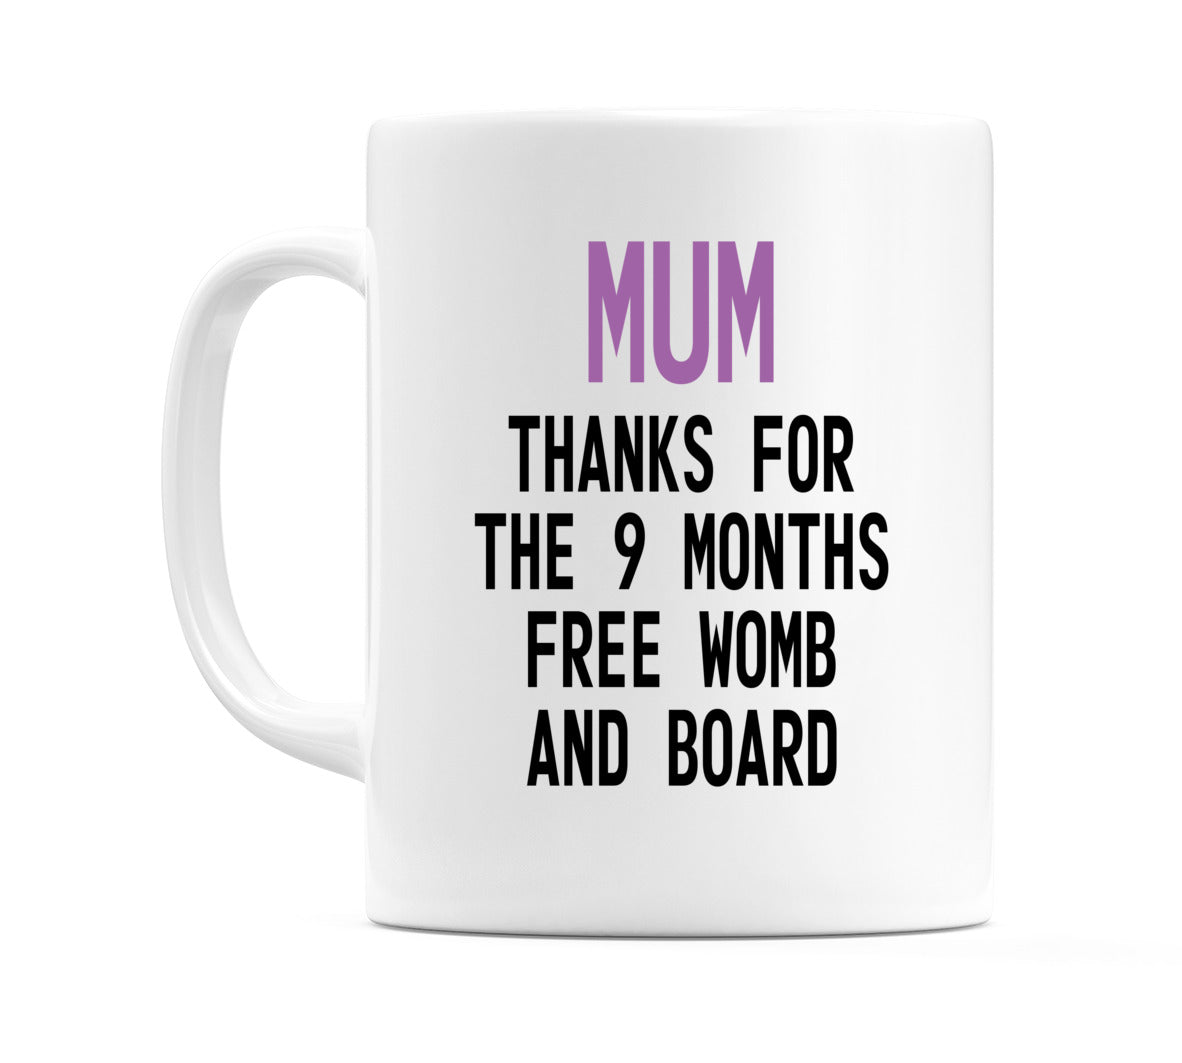 Mum Thanks For The 9 Months Free Womb And Board Mug